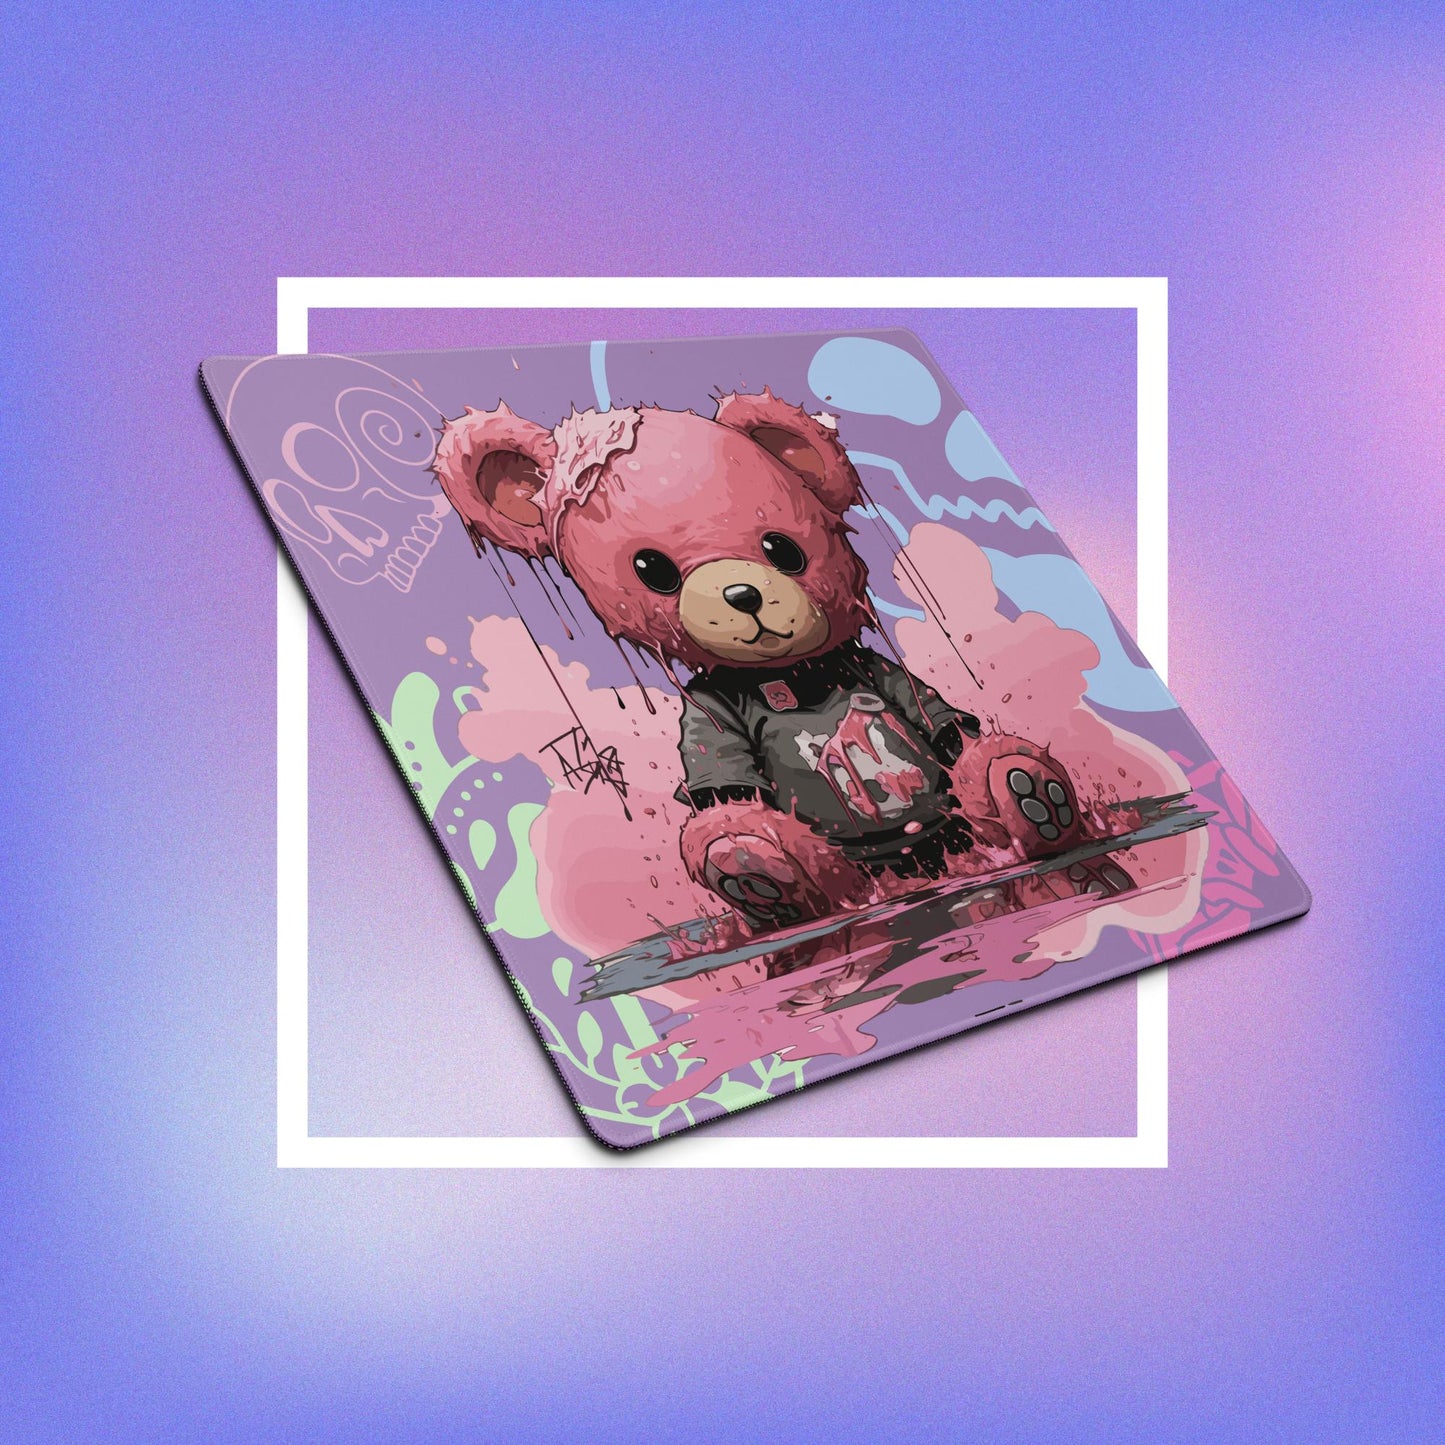 Lovely Teddy Gaming Mouse Pad, Premium-Textured Square Mousepad 18 x 16 Inch, Stitched Edge Anti-Slip Waterproof Rubber Mouse Mat, Pretty Cute Mouse Pad for Office Gaming Laptop